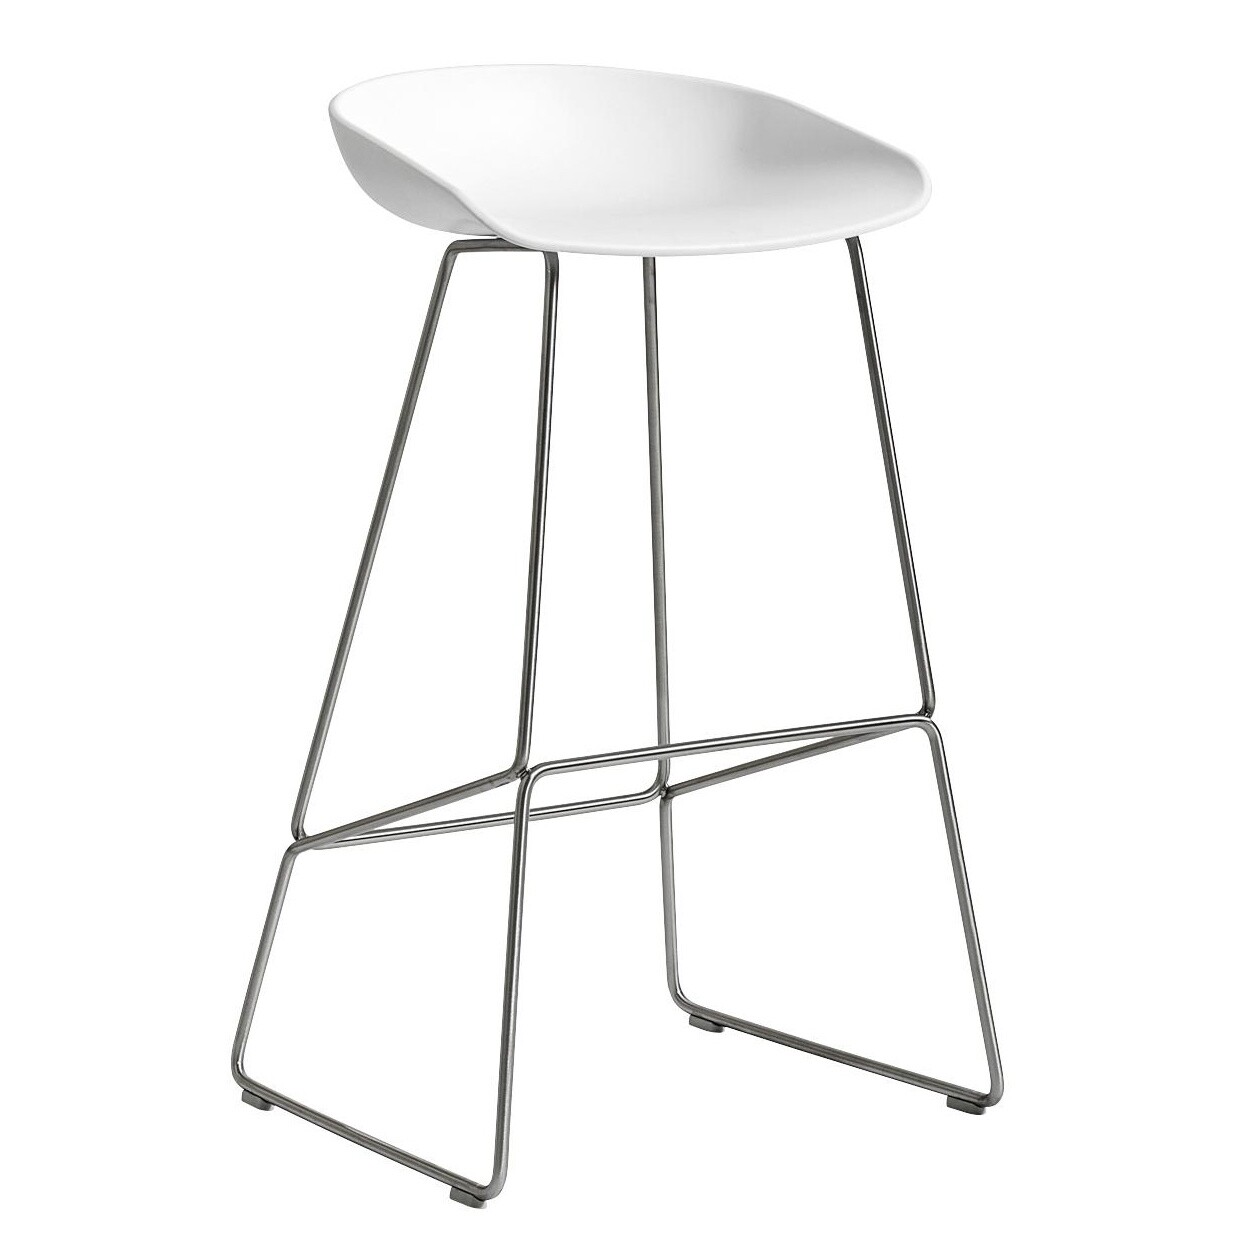 ejendom mentalitet tvilling HAY About a Stool AAS 38 Bar Stool High Stainless Steel Base |  AmbienteDirect